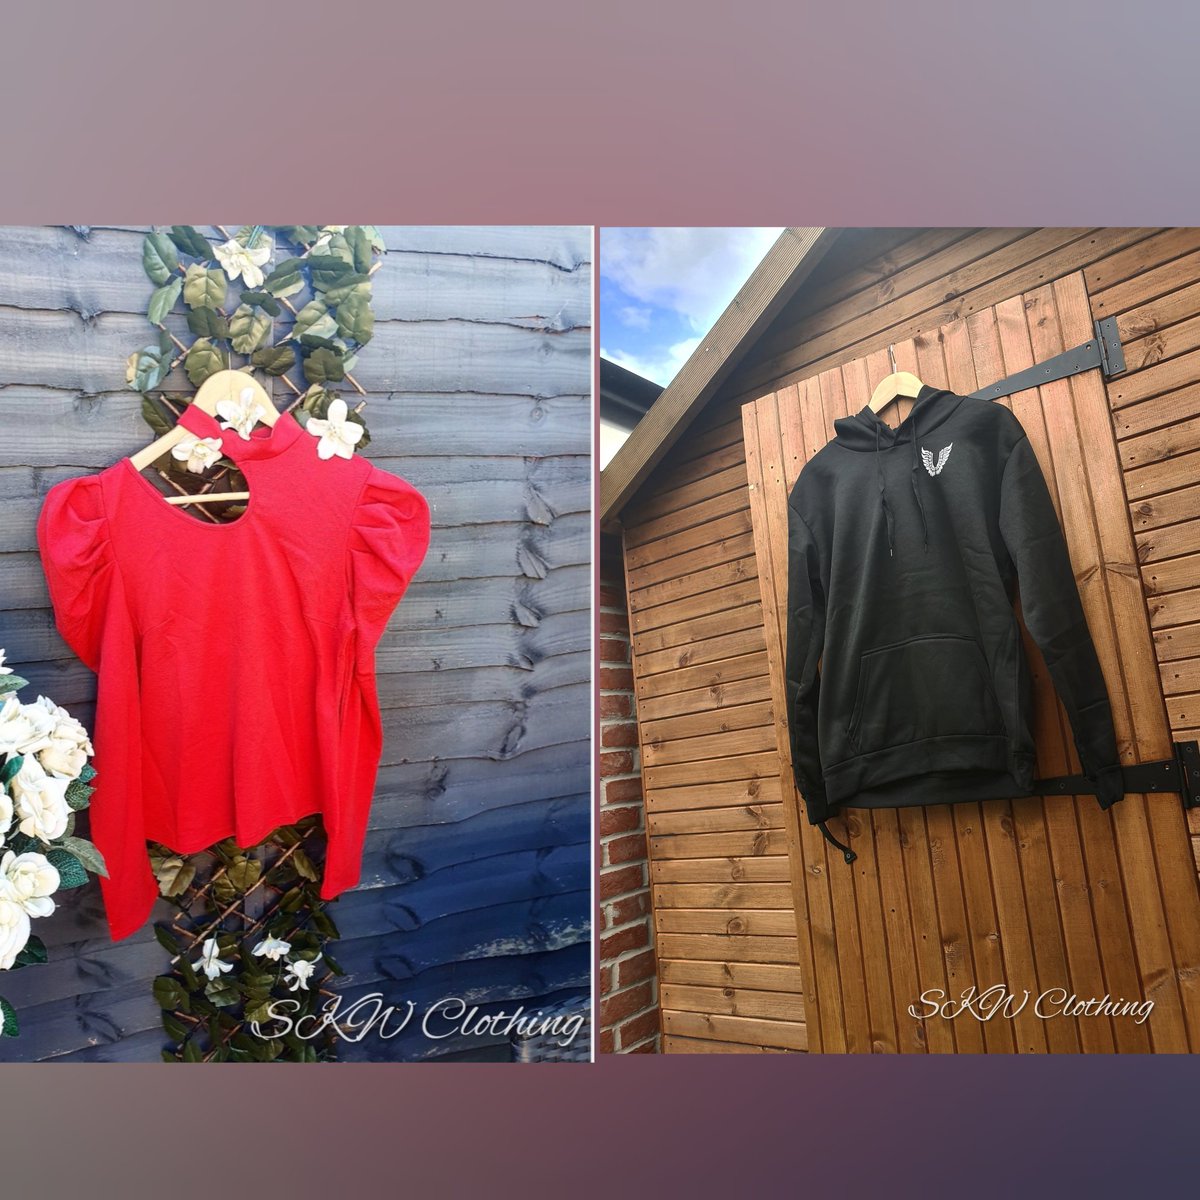 ⚪ We have decided to join Twitter for our new business!
Check out our clothing range 👌
#onlinebusiness #clothingline #freshclothes #style #lockdown #womenswear #maleclothing #blouses #loungewear #tracksuit #dresses #lockdown #familybusiness